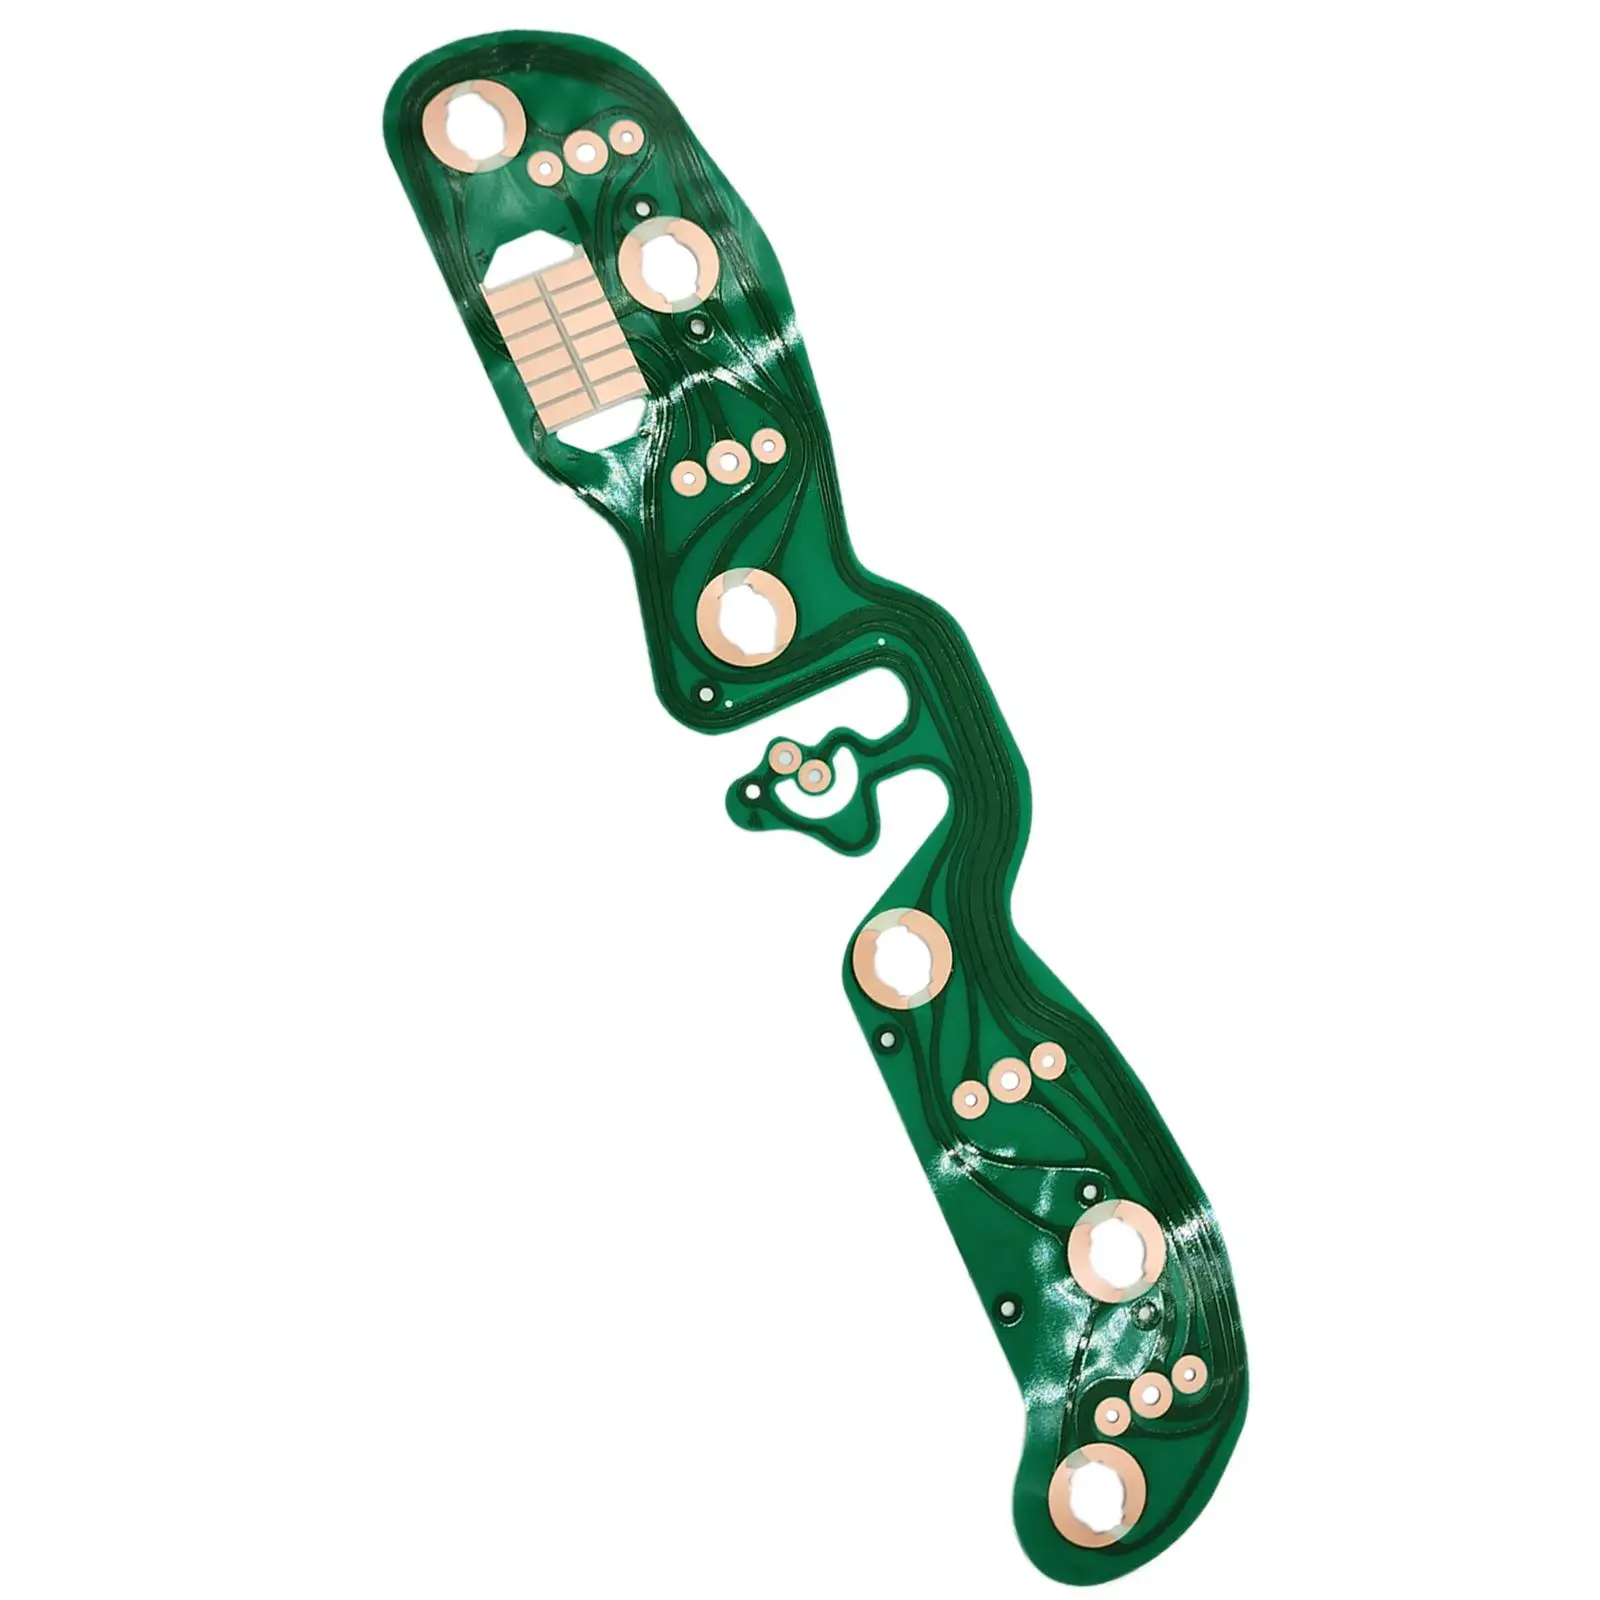 Gauges Printed Circuit Board for High Performance Parts